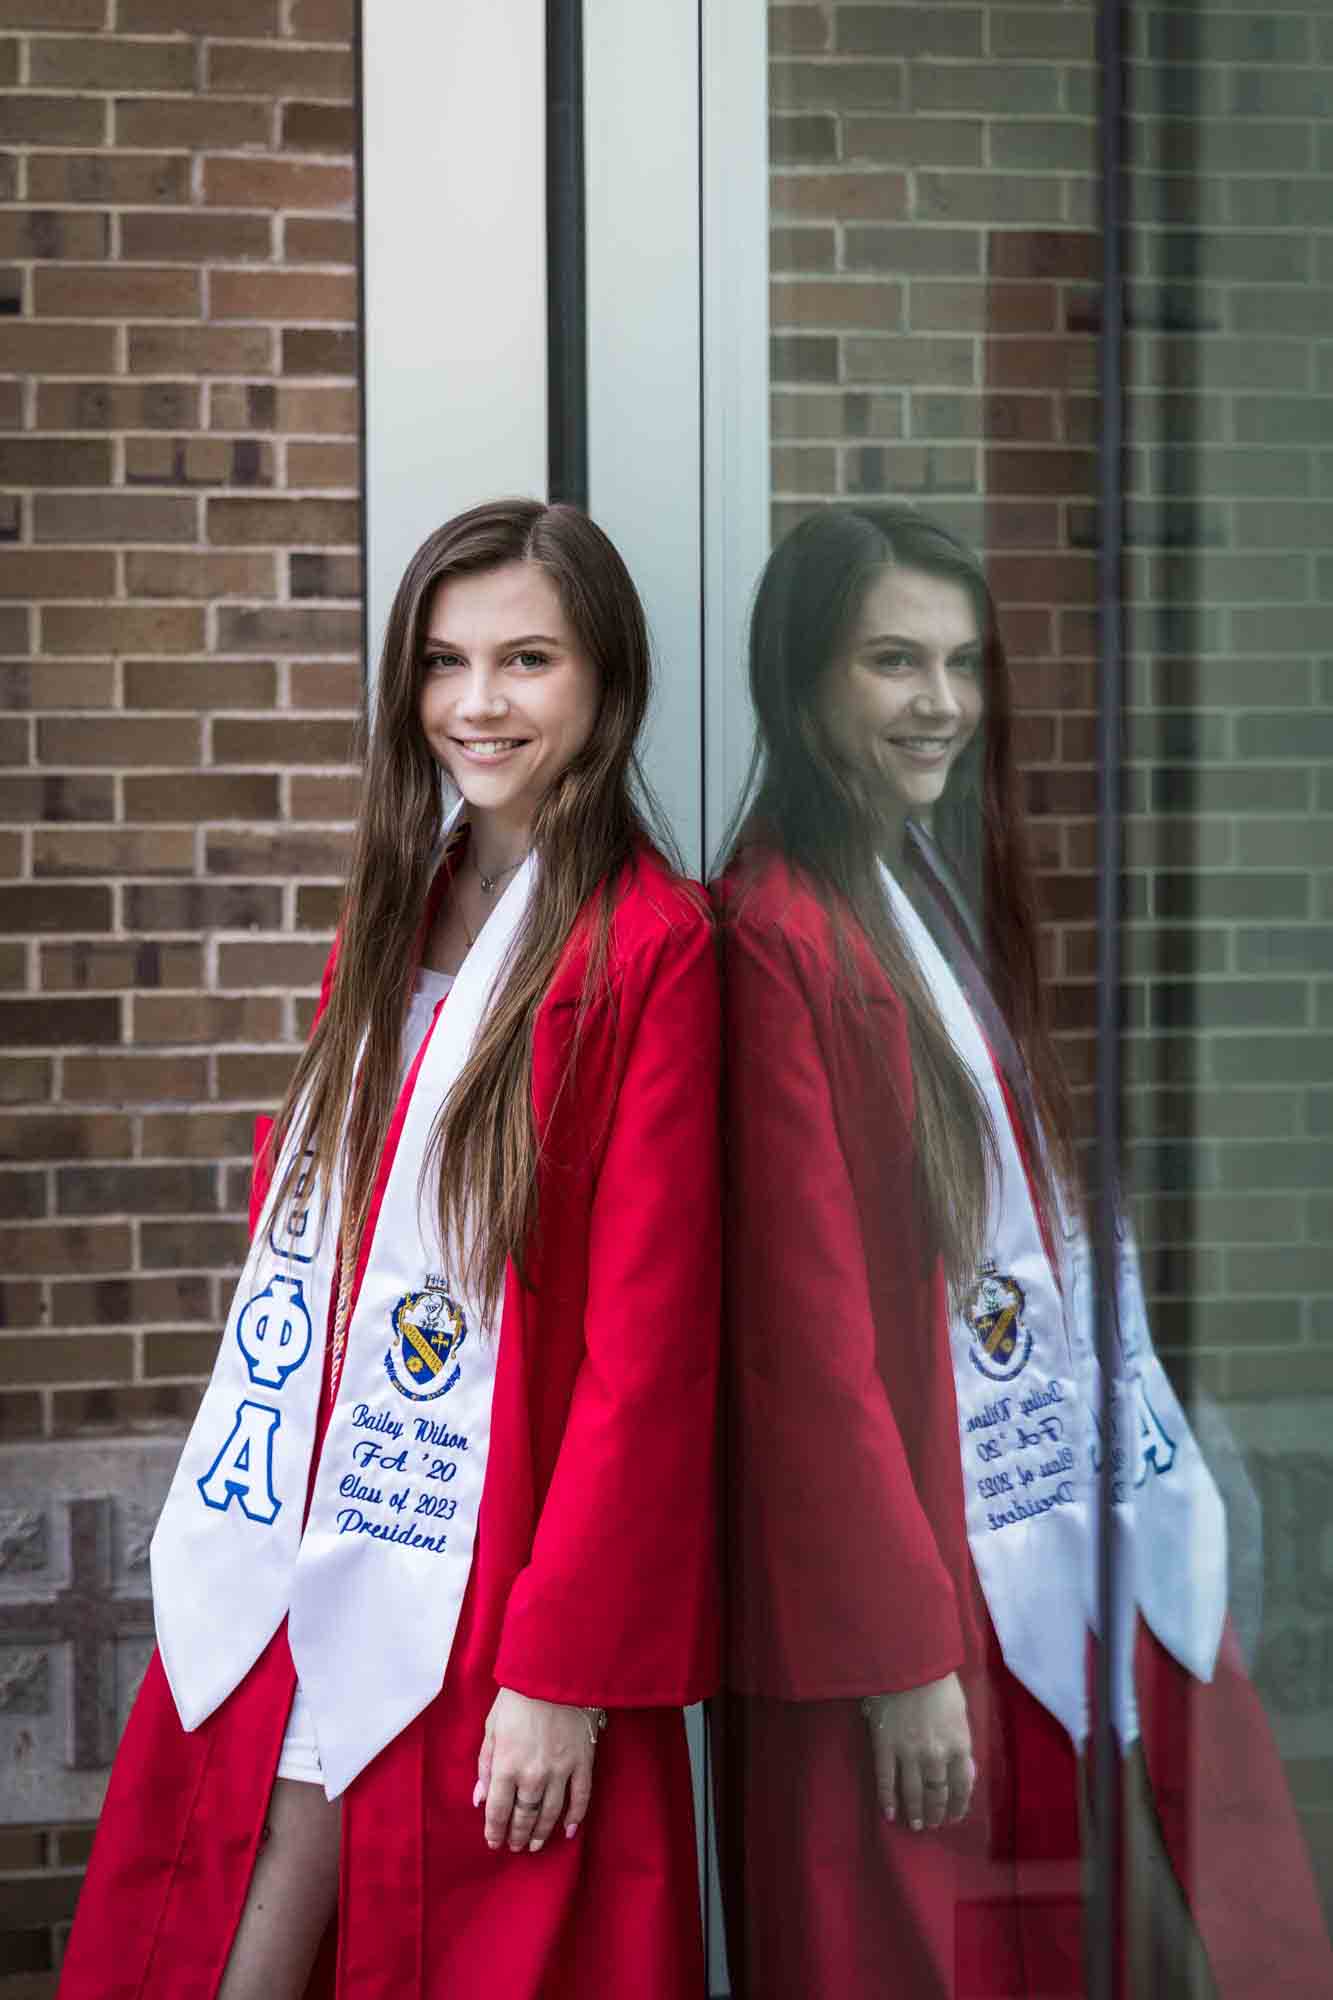 Female graduate wearing red robe and white sash leaning against window with reflection during a St. John’s University graduate portrait session